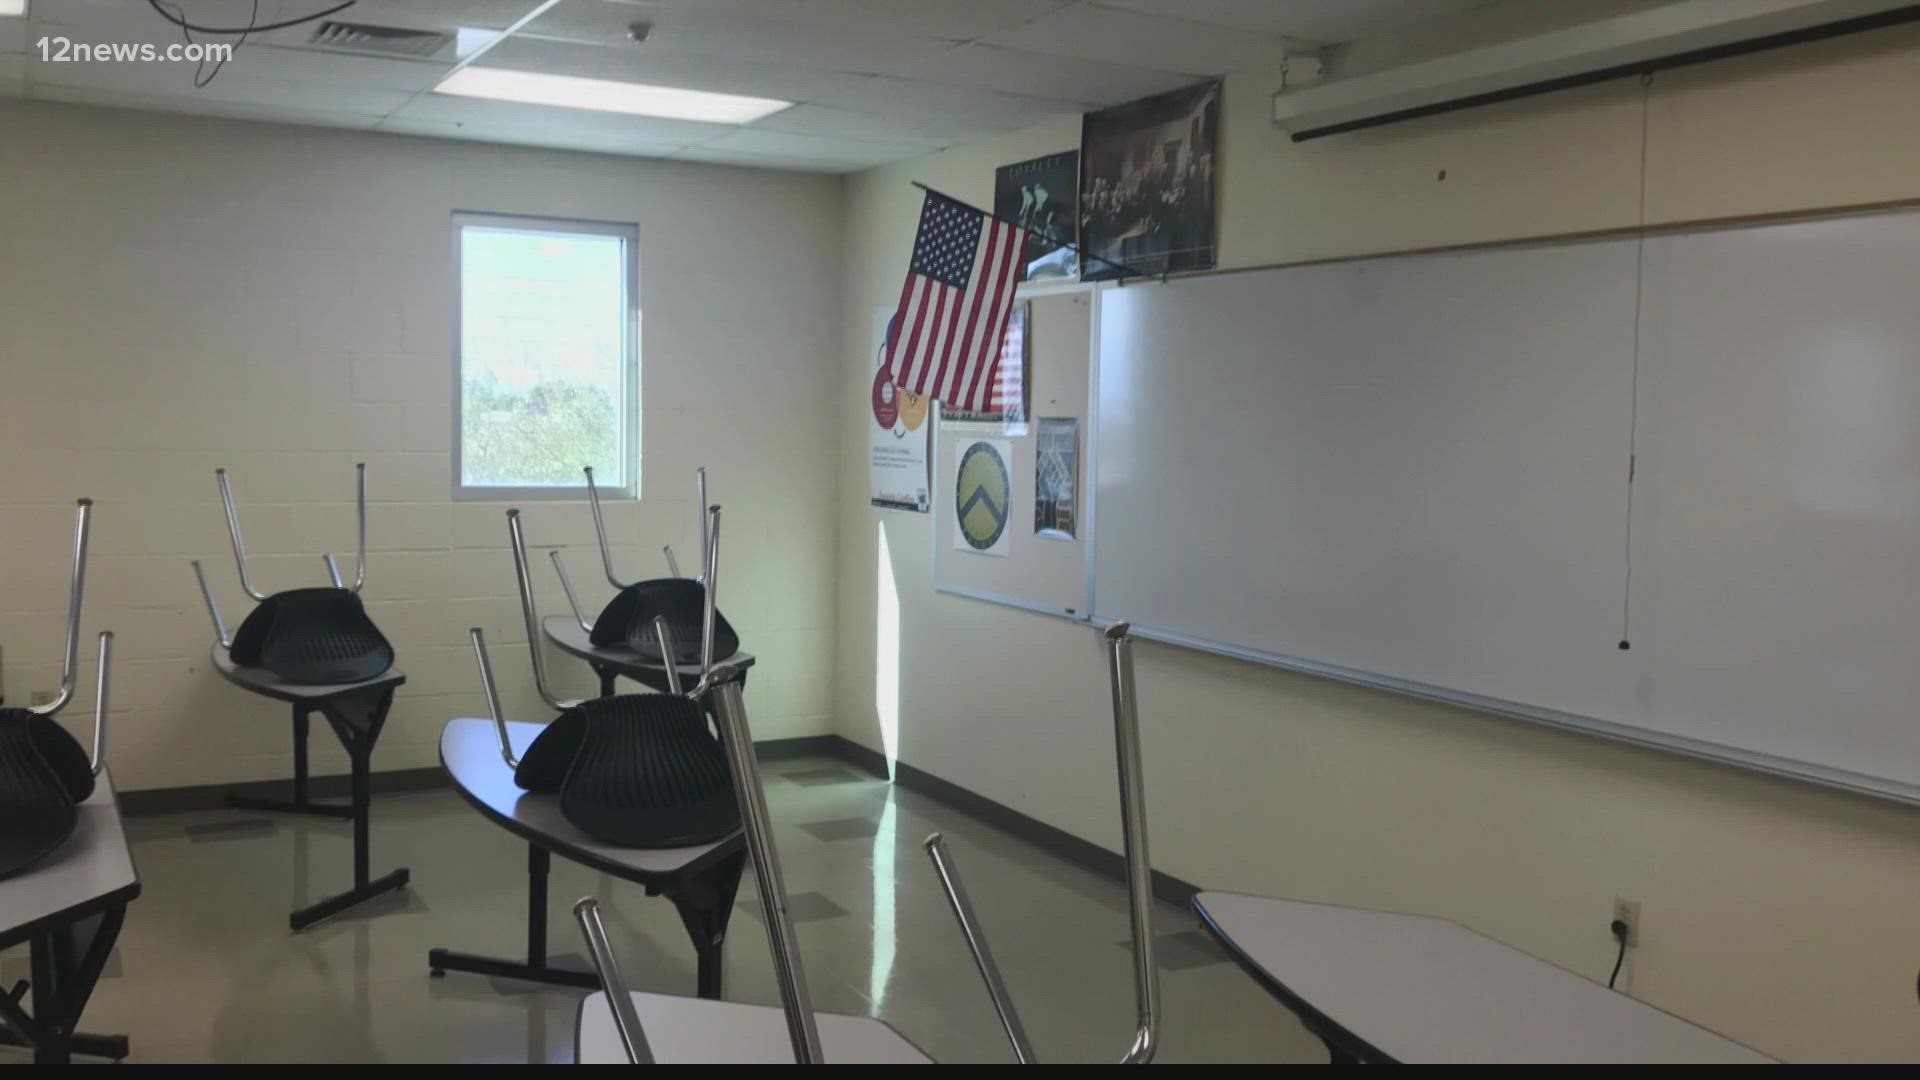 Schools are just like other workplaces these days. Lots of people are calling in sick. But unlike other workplaces, Gov. Ducey has ordered schools to remain open.